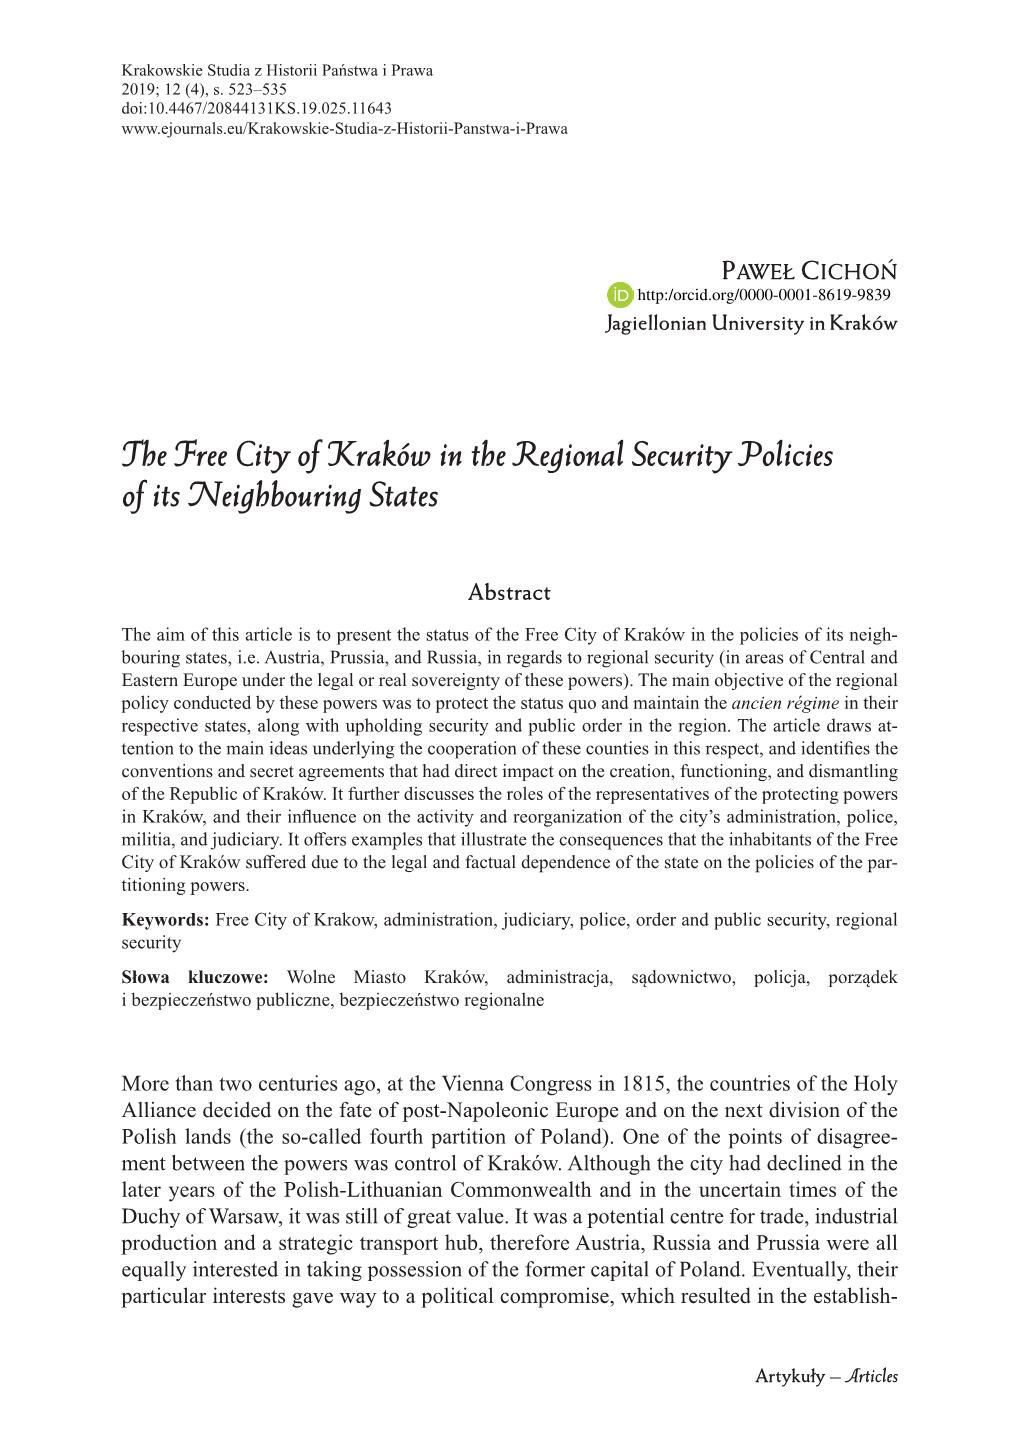 The Free City of Kraków in the Regional Security Policies of Its Neighbouring States